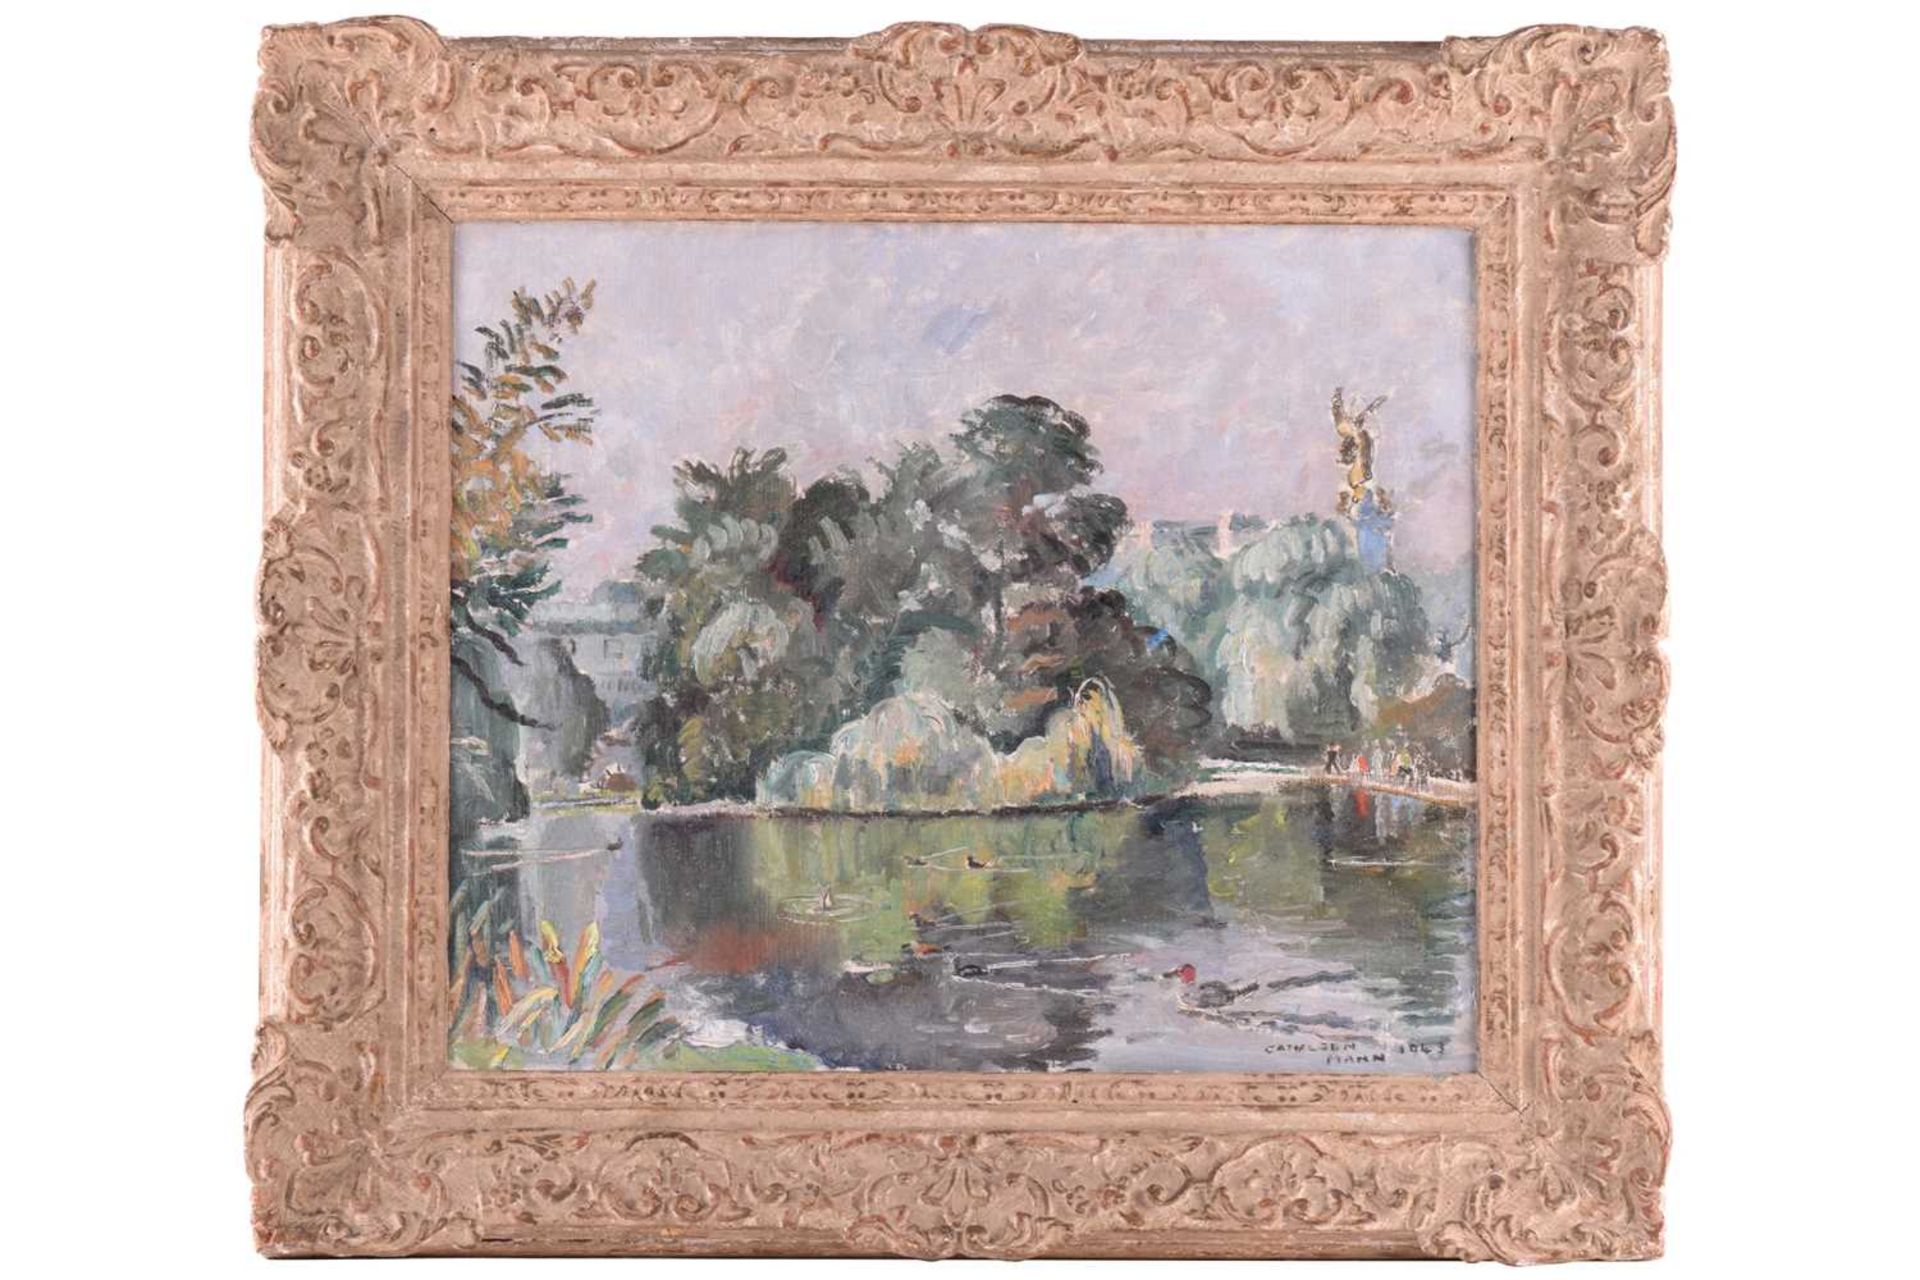 Cathleen S Mann (1896-1959), St James’ Park, signed and dated 1943, oil on canvas, 50 x 60cm,